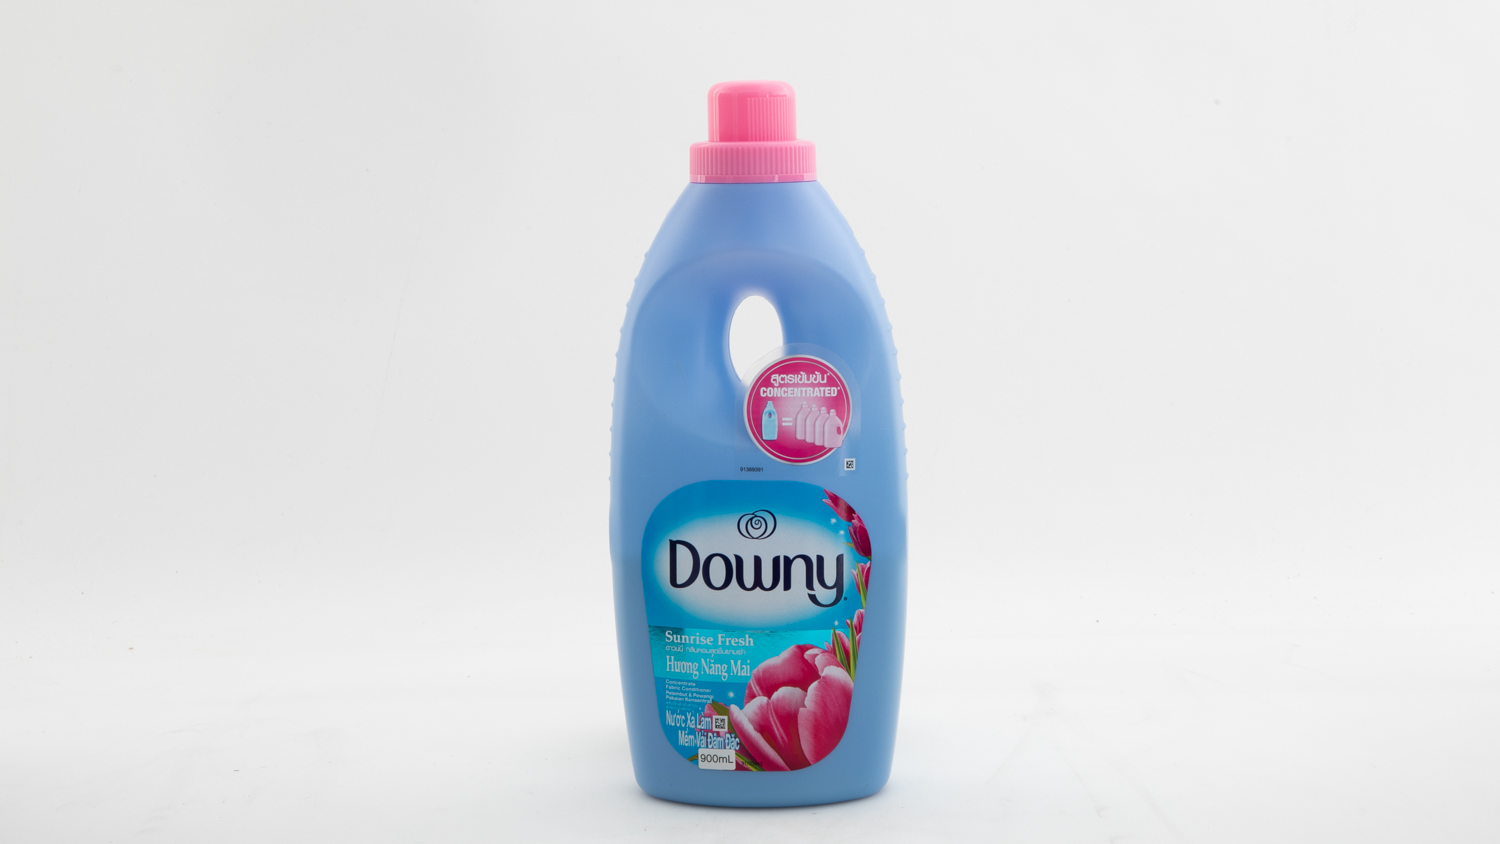 Downy Sunrise Fresh Concentrate Fabric Conditioner carousel image